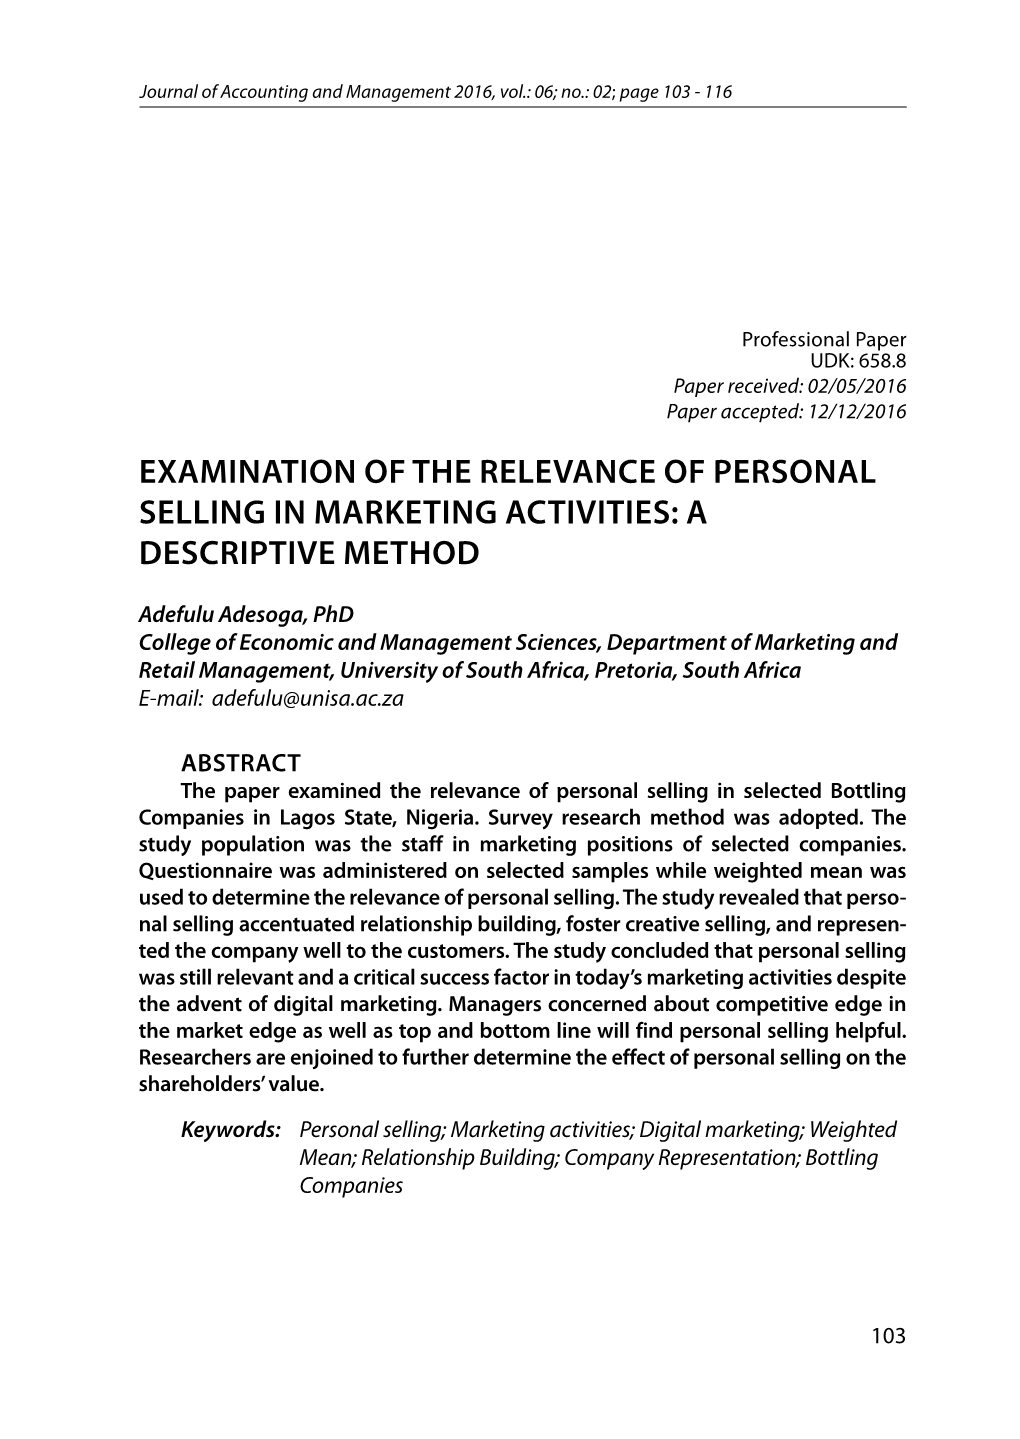 Examination of the Relevance of Personal Selling in Marketing Activities: a Descriptive Method